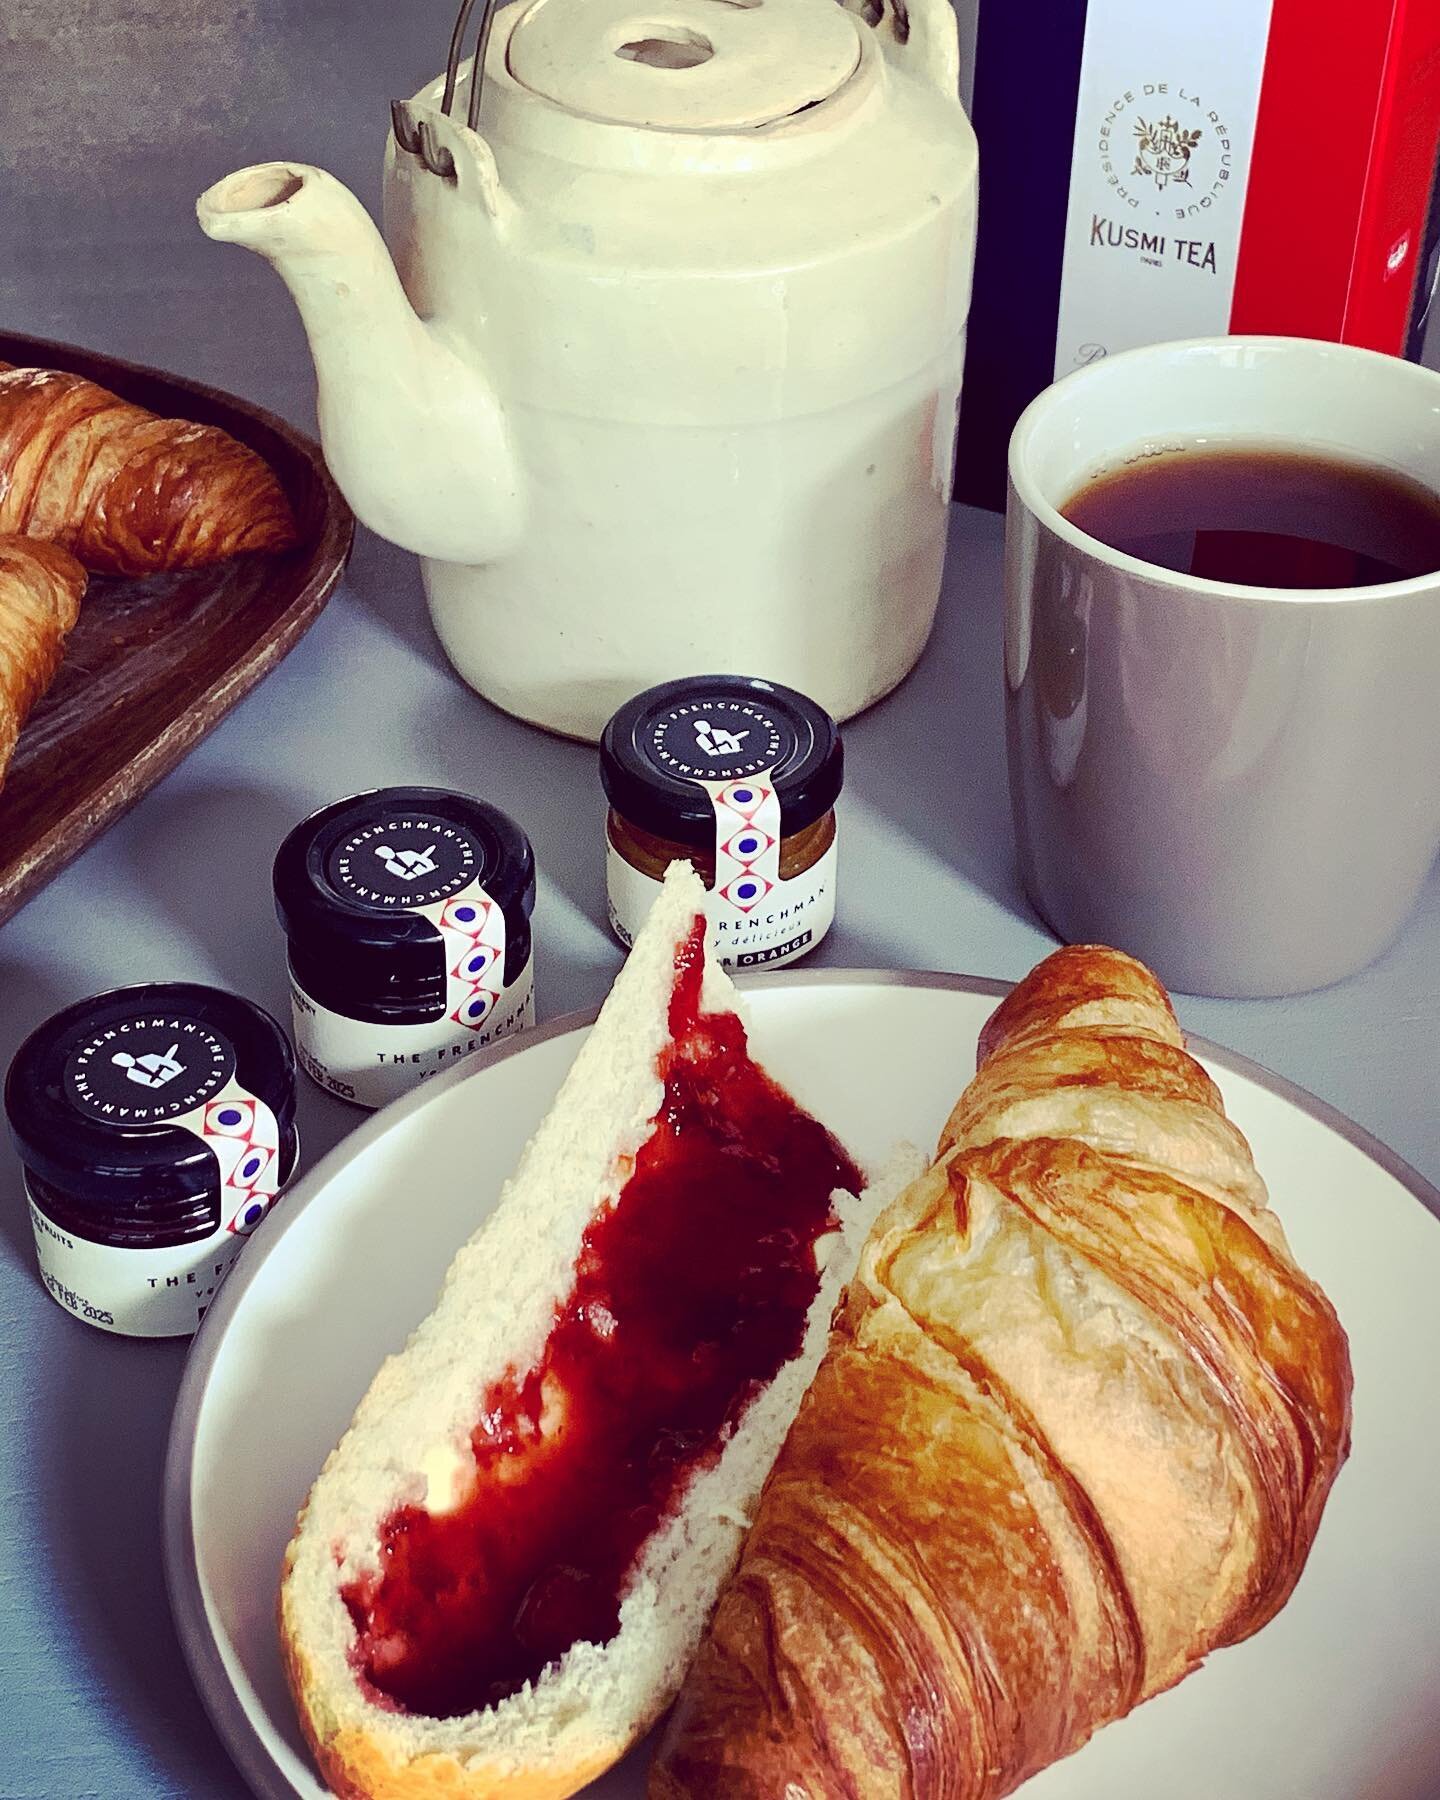 Today is Bastille Day, France&rsquo;s National Day.
What better way to celebrate and start the day with a croissant and our tasty national treasure, La Baguette, adorned with our flavoursome Red Fruits jam.
And what could be more appropriate to drink